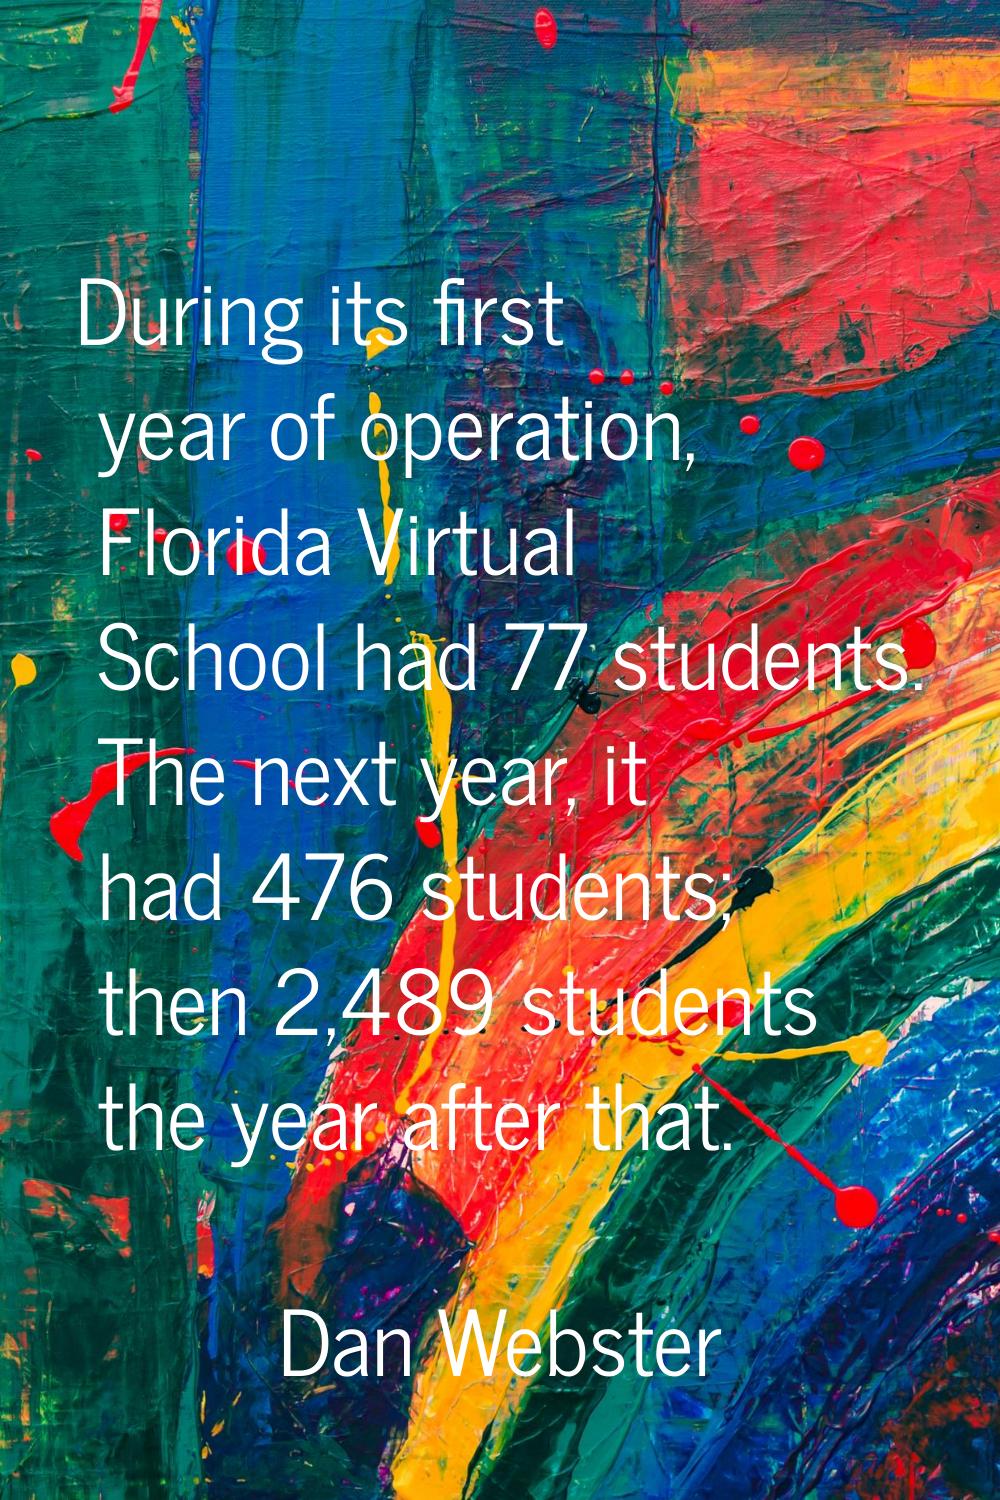 During its first year of operation, Florida Virtual School had 77 students. The next year, it had 4